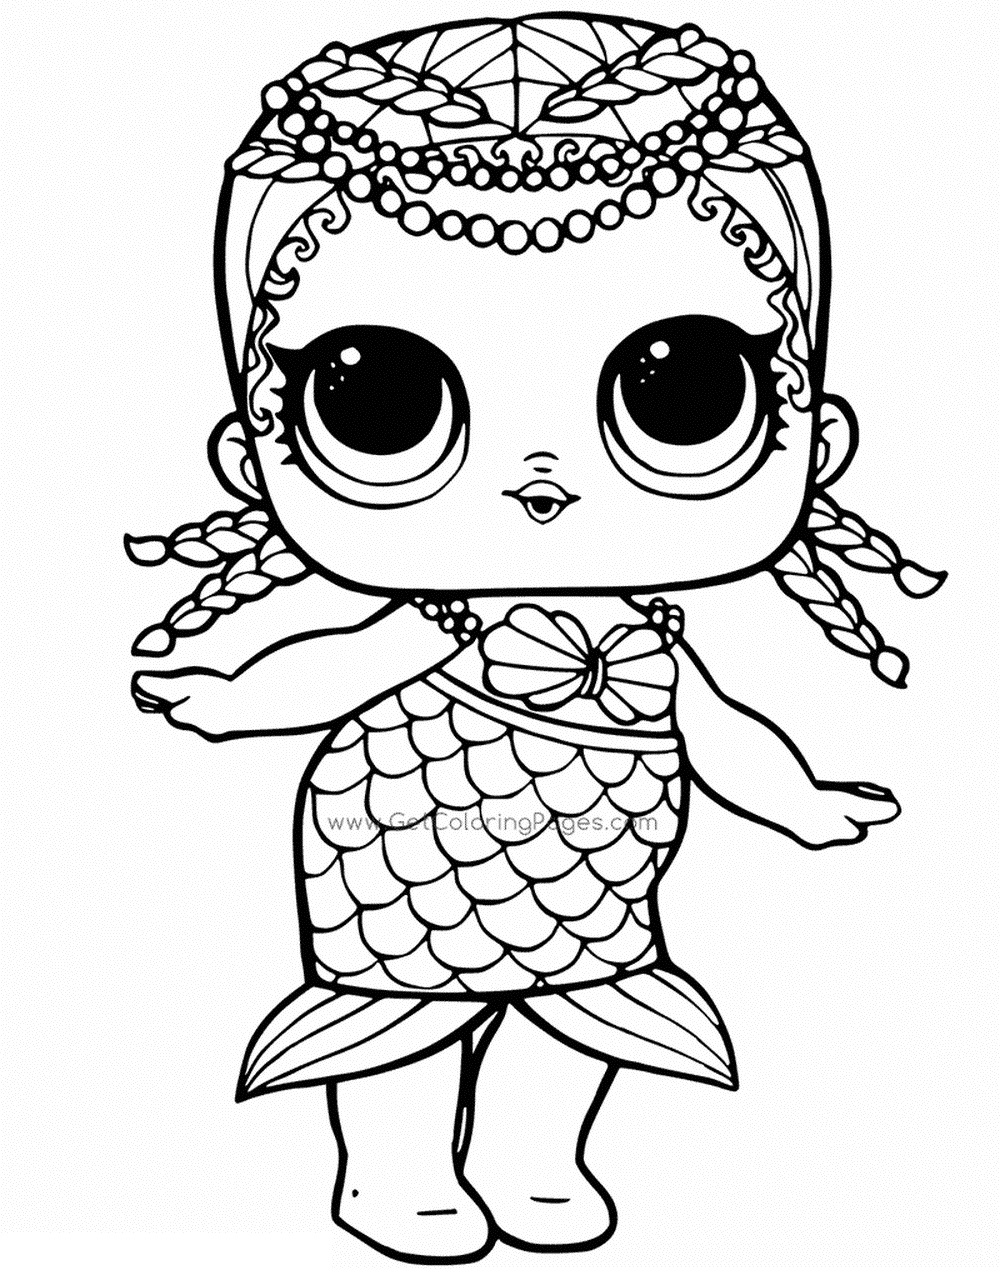 LOL Surprise Dolls Coloring Pages. Print Them for Free! All ...